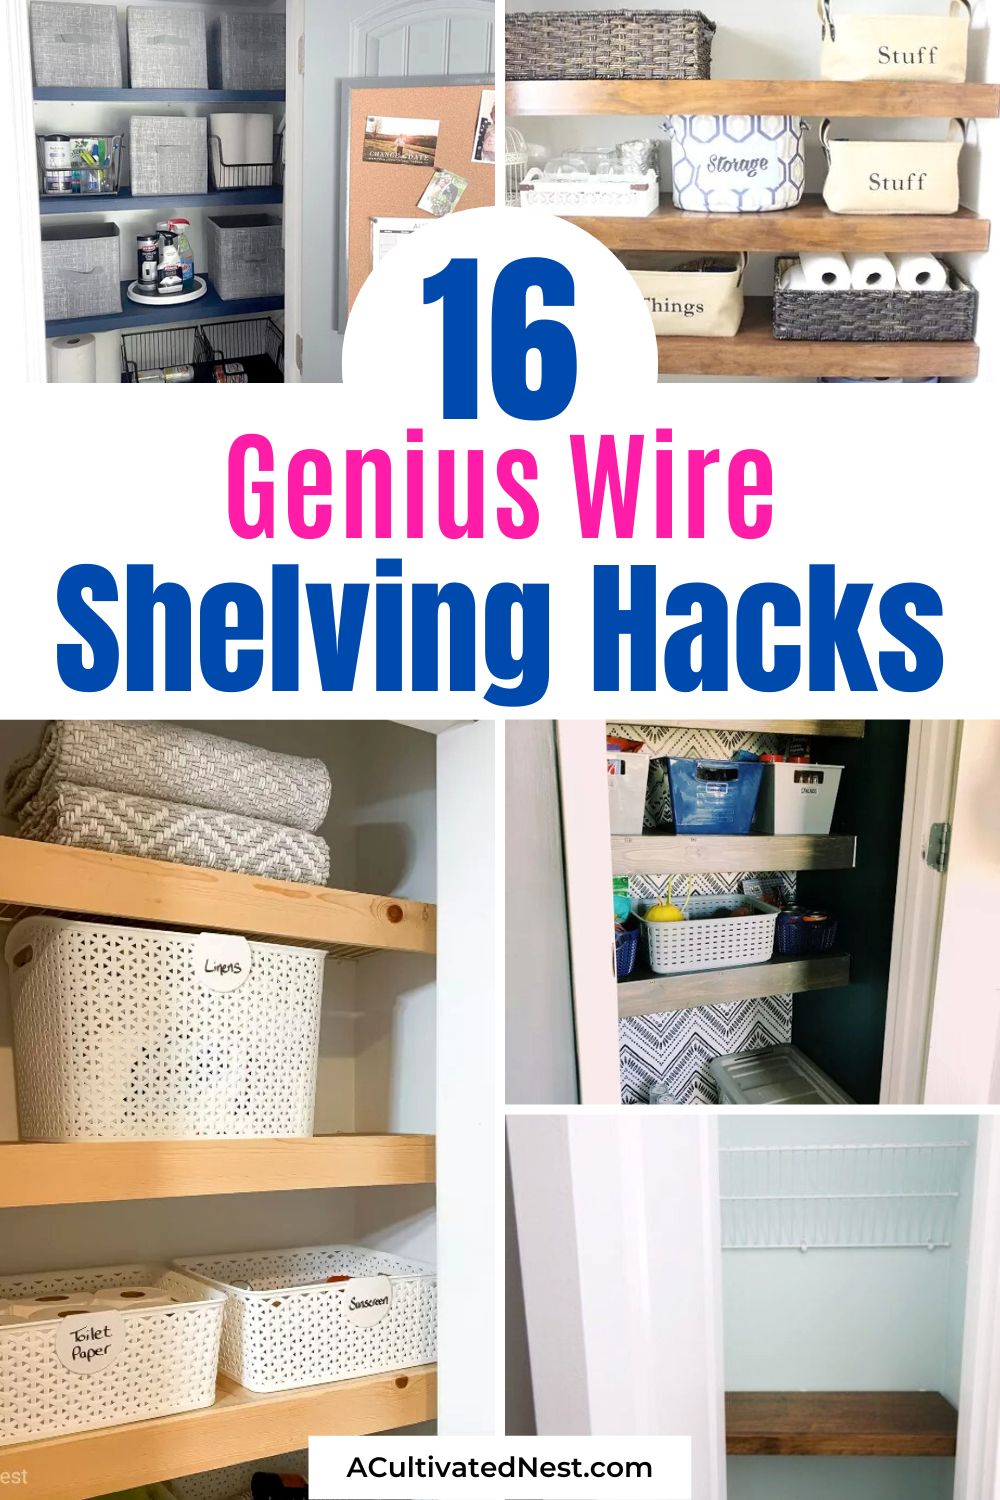 16 Genius Wire Shelving Hacks- Use these clever wire shelving hacks to easily update those drab wire shelves around your house to make them beautiful and functional! | #organize #shelvingHacks #homeOrganization #diyOrganizing #ACultivatedNest